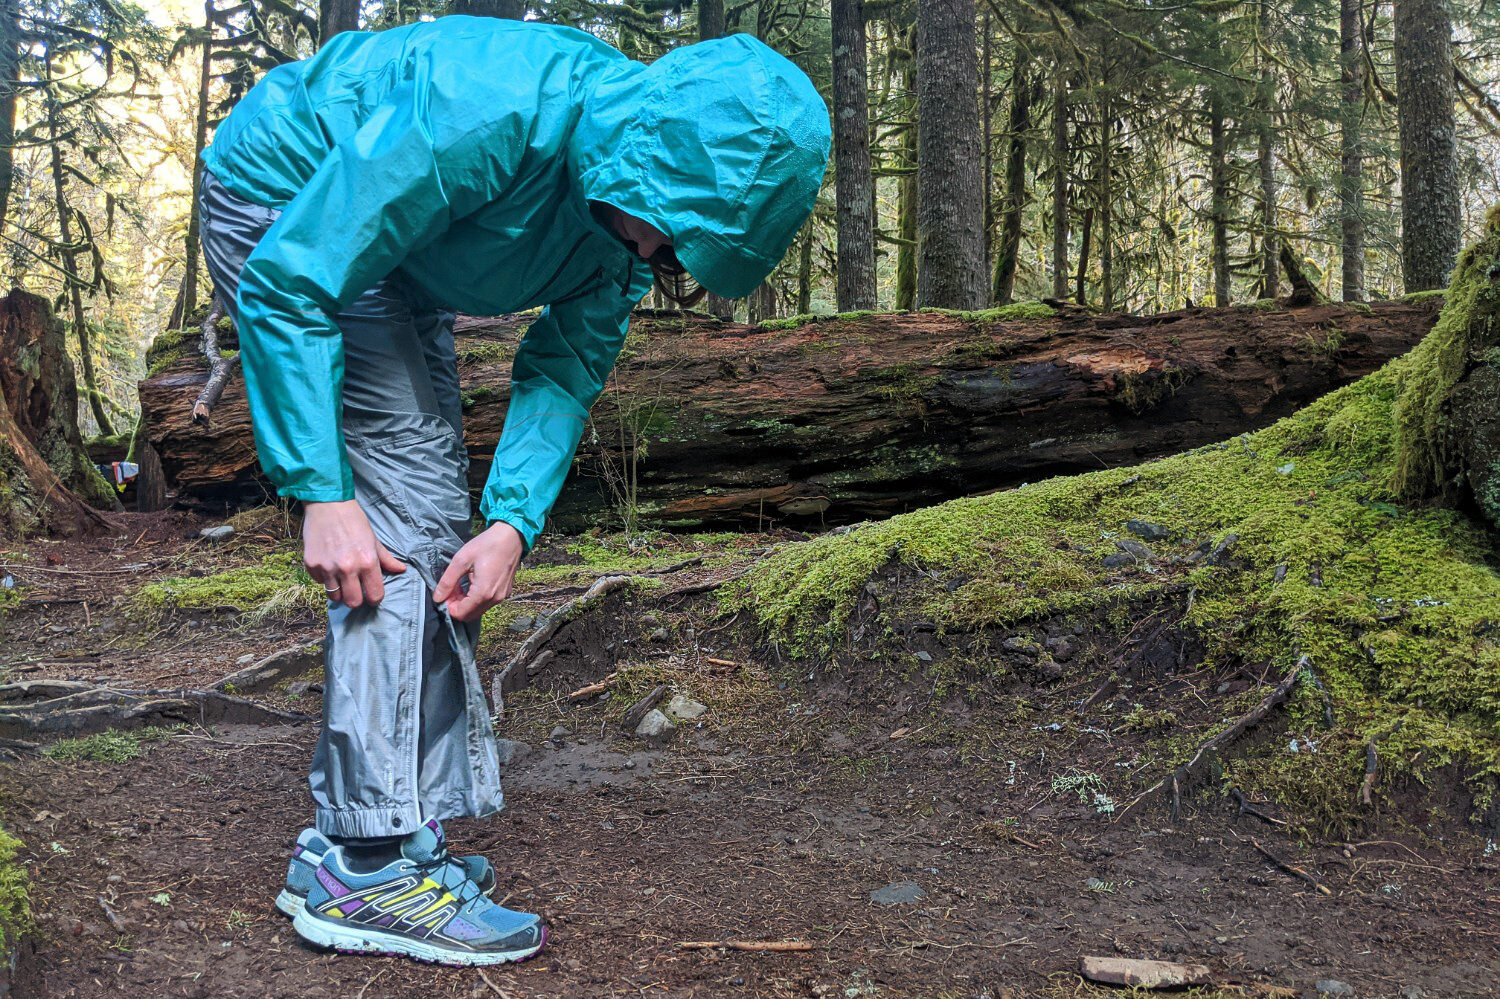 The Outdoor Research Helium Pants only have ankle-zips, but they still breathe pretty well since they’re made with lightweight materials